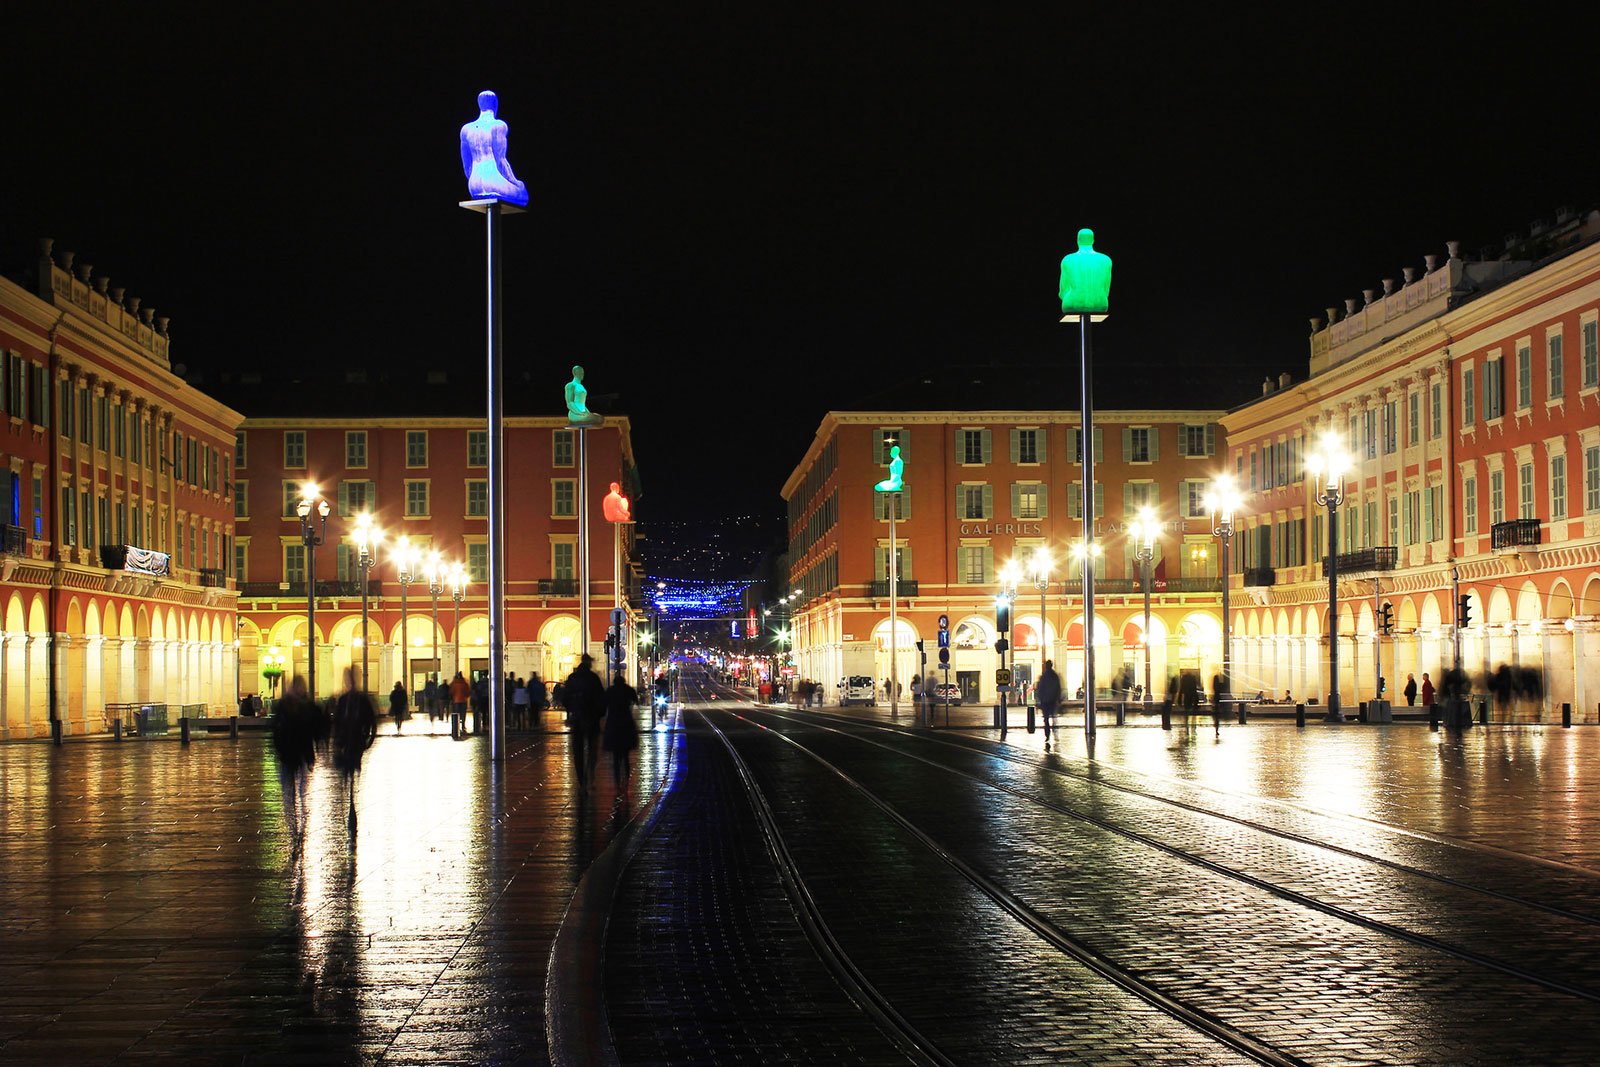 How to see the illuminated statues in Nice